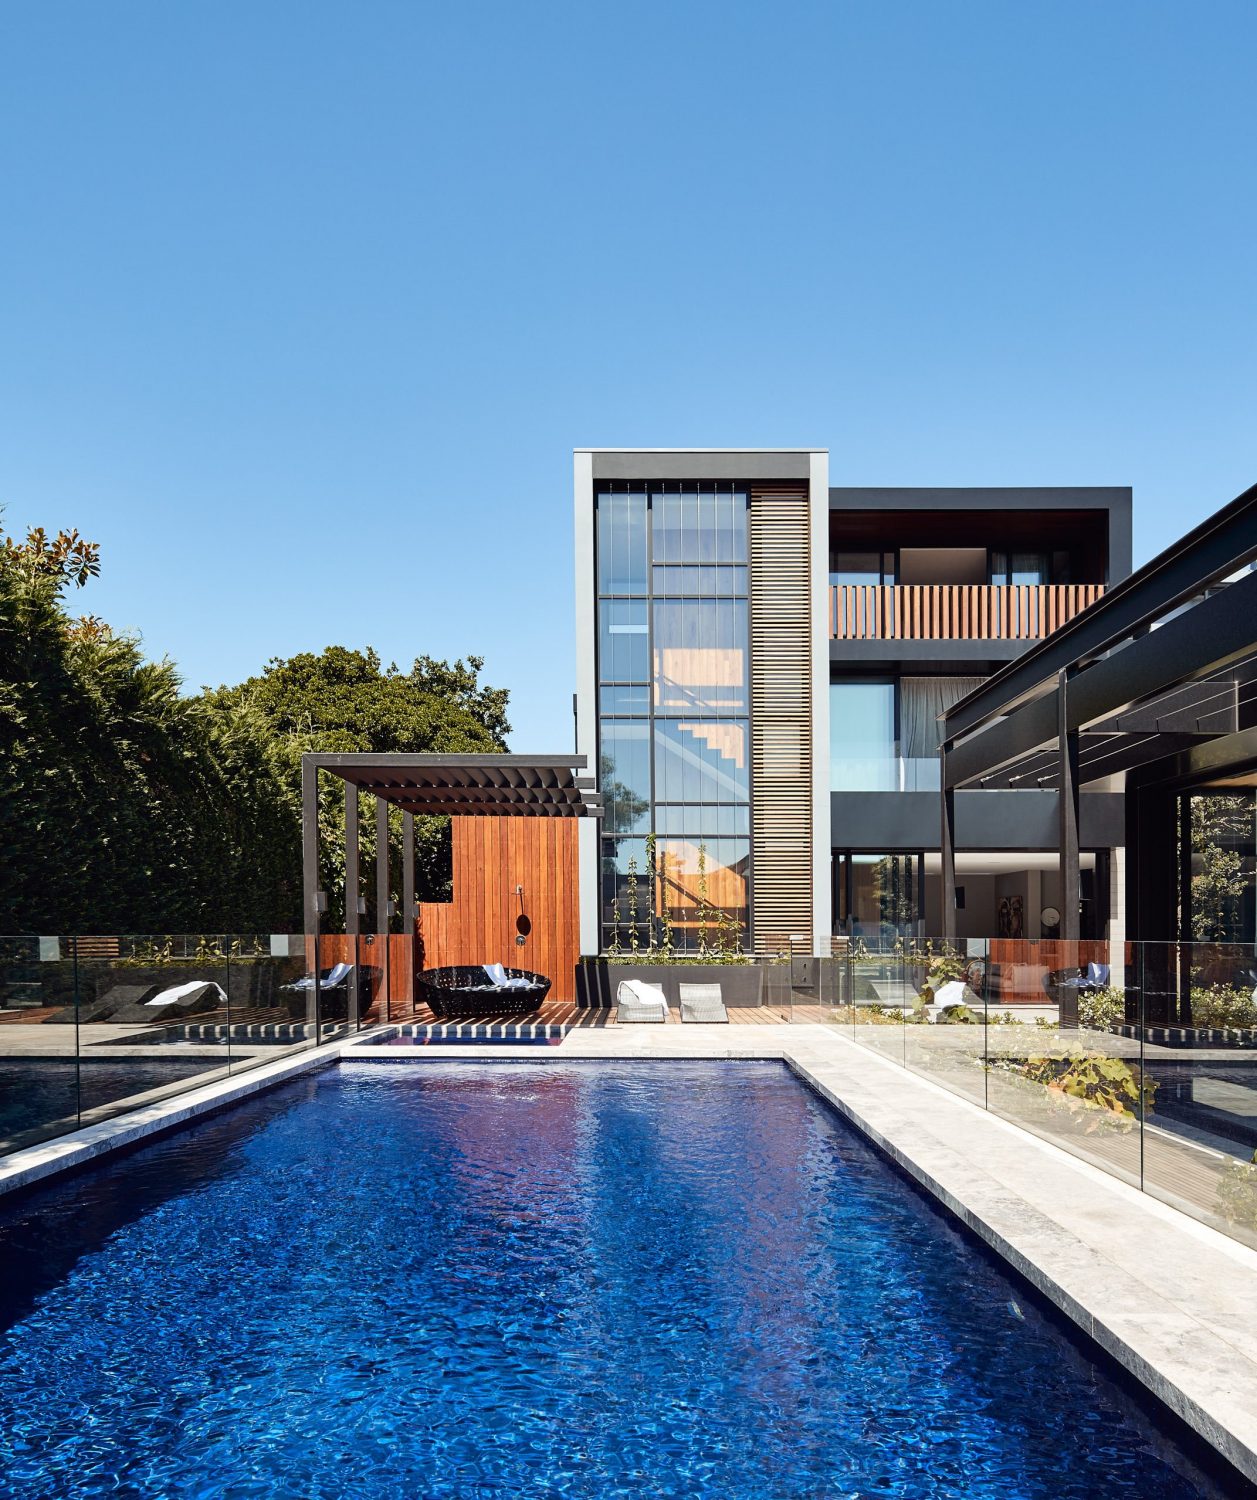 Hawthorn East House | Renovation of a Heritage Home by STAR Architecture